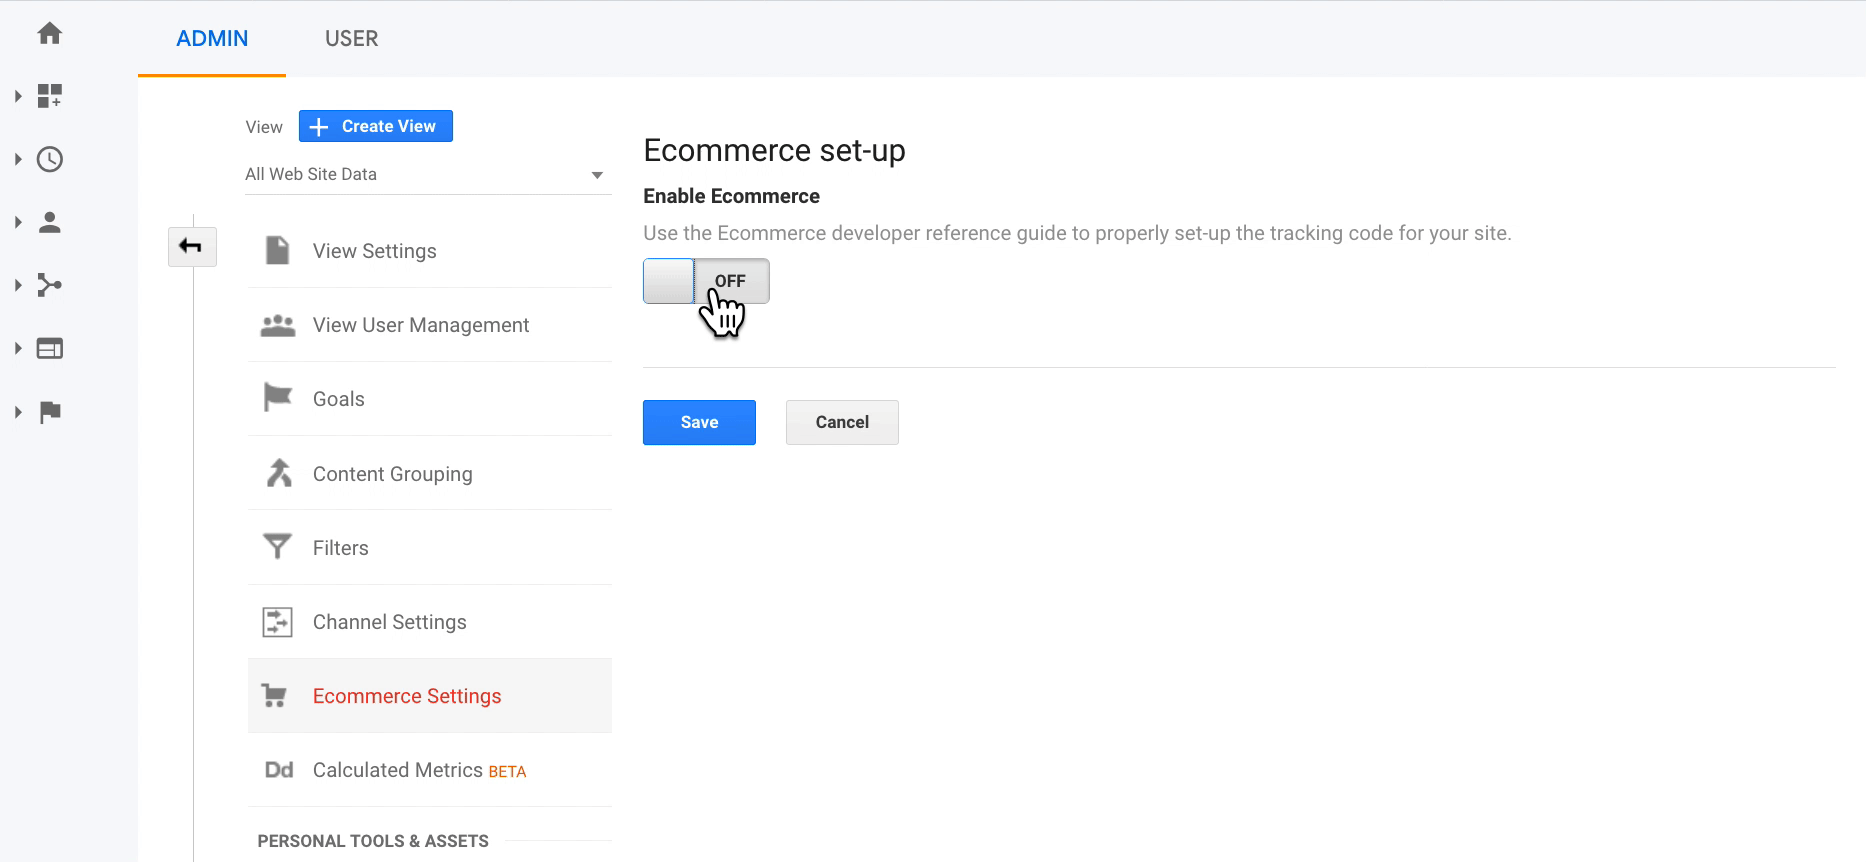 Set Enable Ecommerce to On. Set Enable Enhanced Ecommerce Reporting to on. Click save.